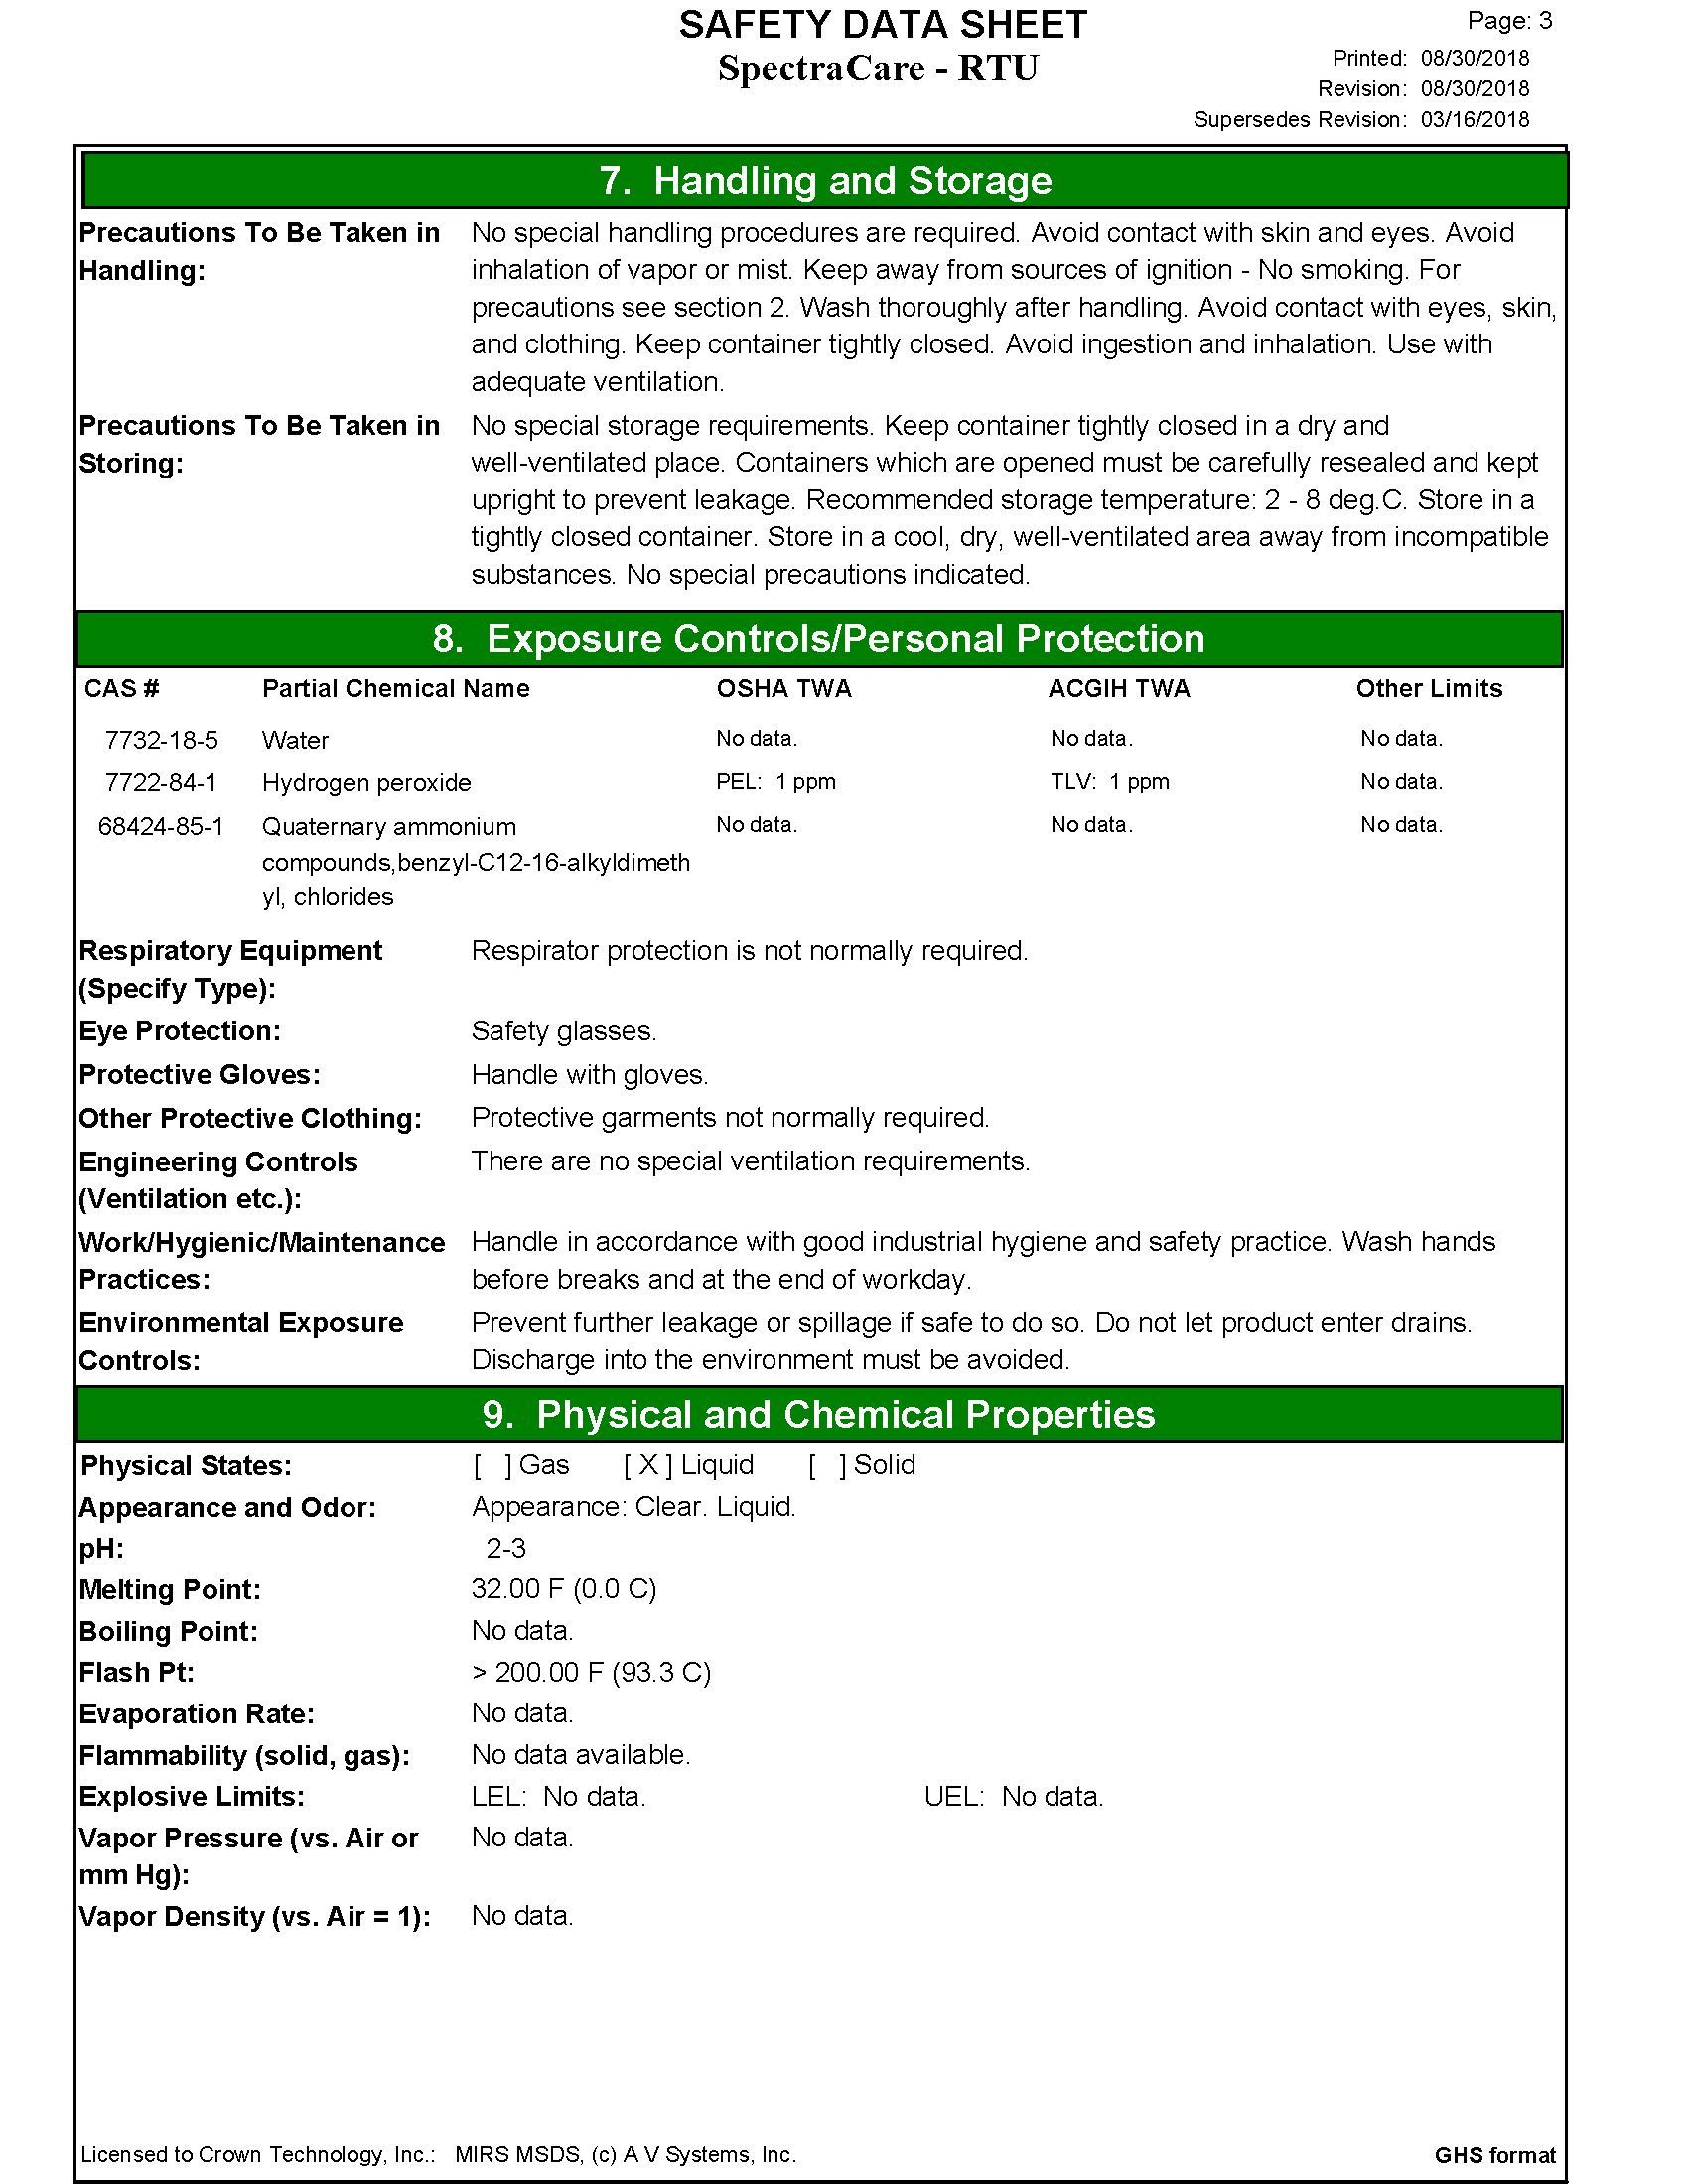 SpectraCare RTU_SDS-Full_Page_3